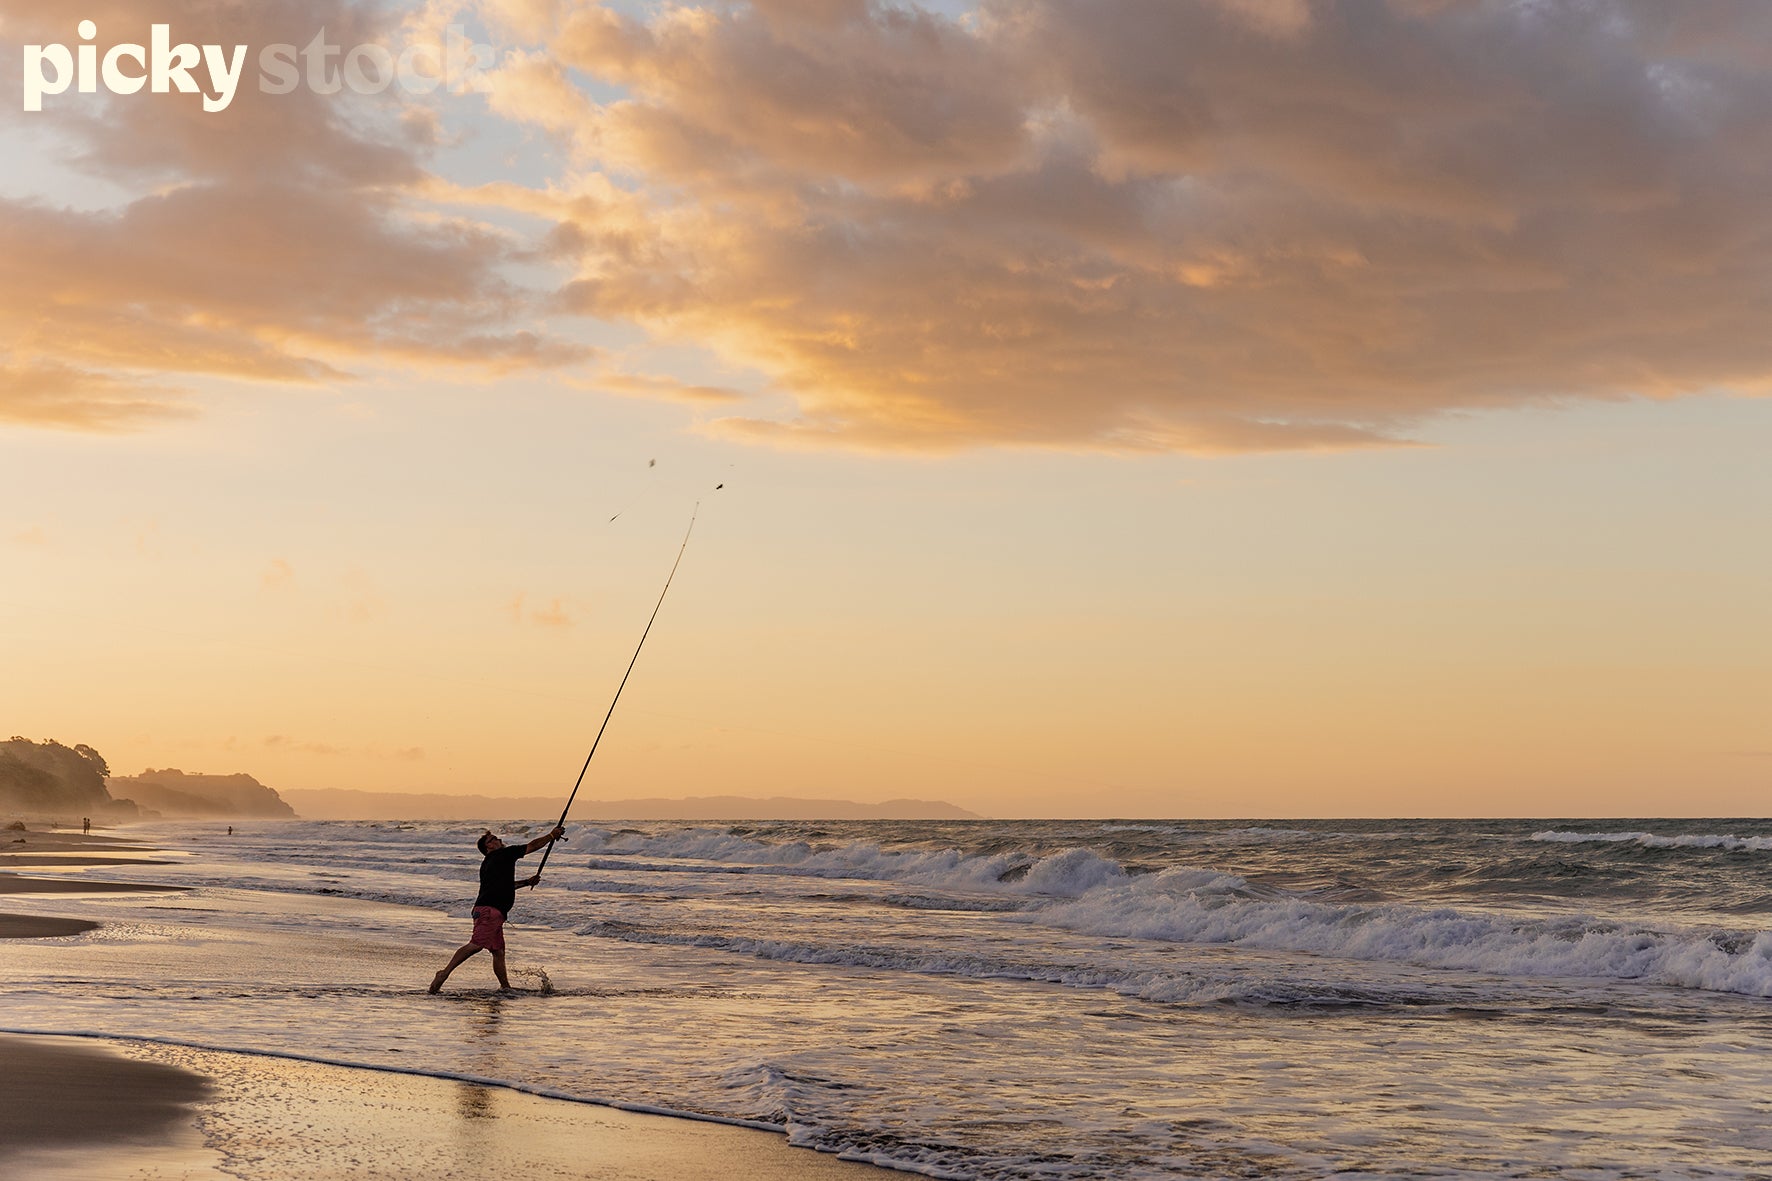 Man fishing from the beach casting his line at Opotiki Beach. Man is wearing red board shorts togs with a black long sleeve top. Fishing at sunset, with a few rolling waves breaking on the shore. Man is standing in water ankle length.